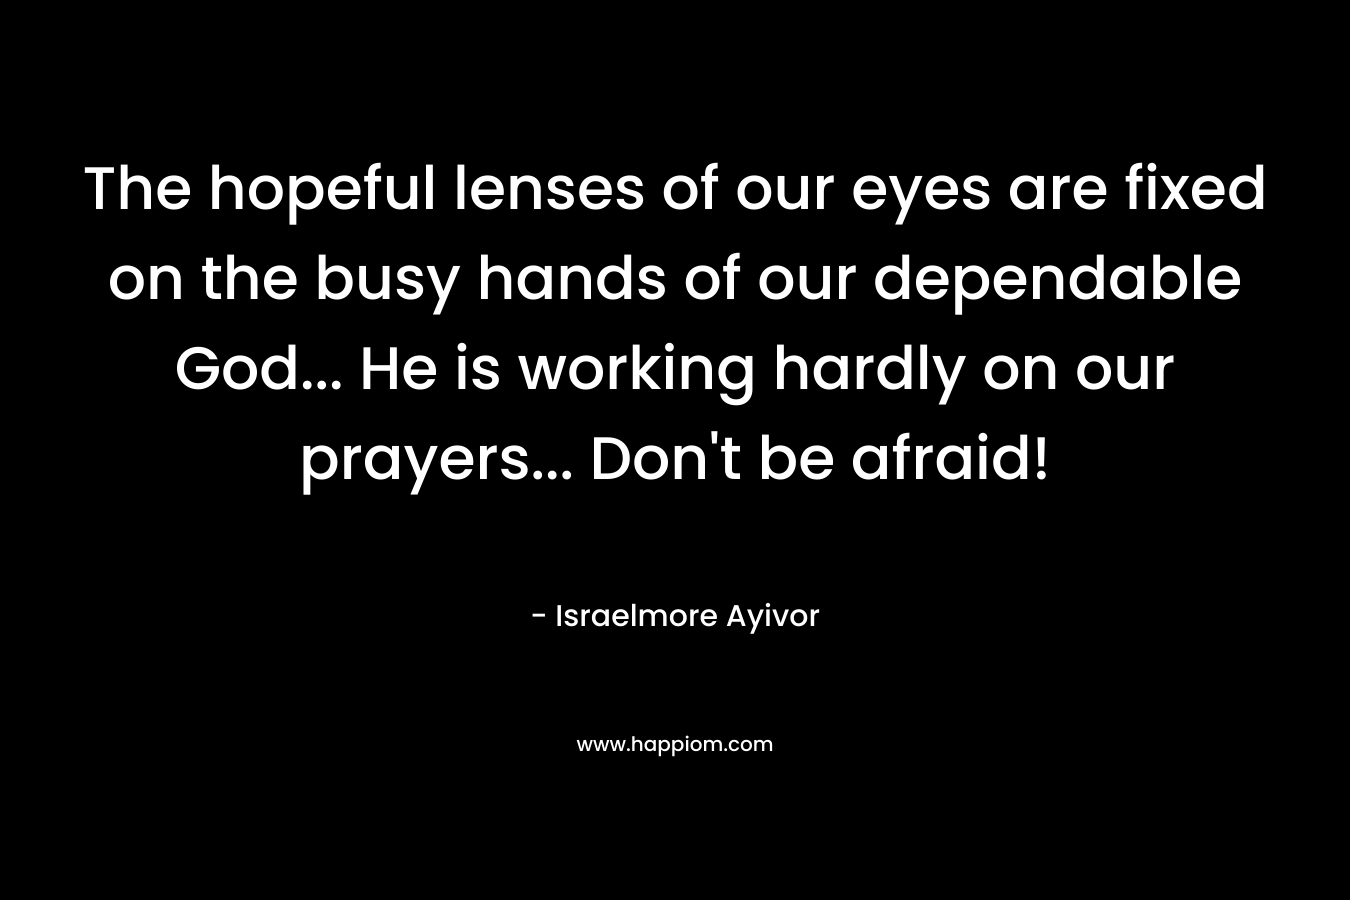 The hopeful lenses of our eyes are fixed on the busy hands of our dependable God... He is working hardly on our prayers... Don't be afraid!